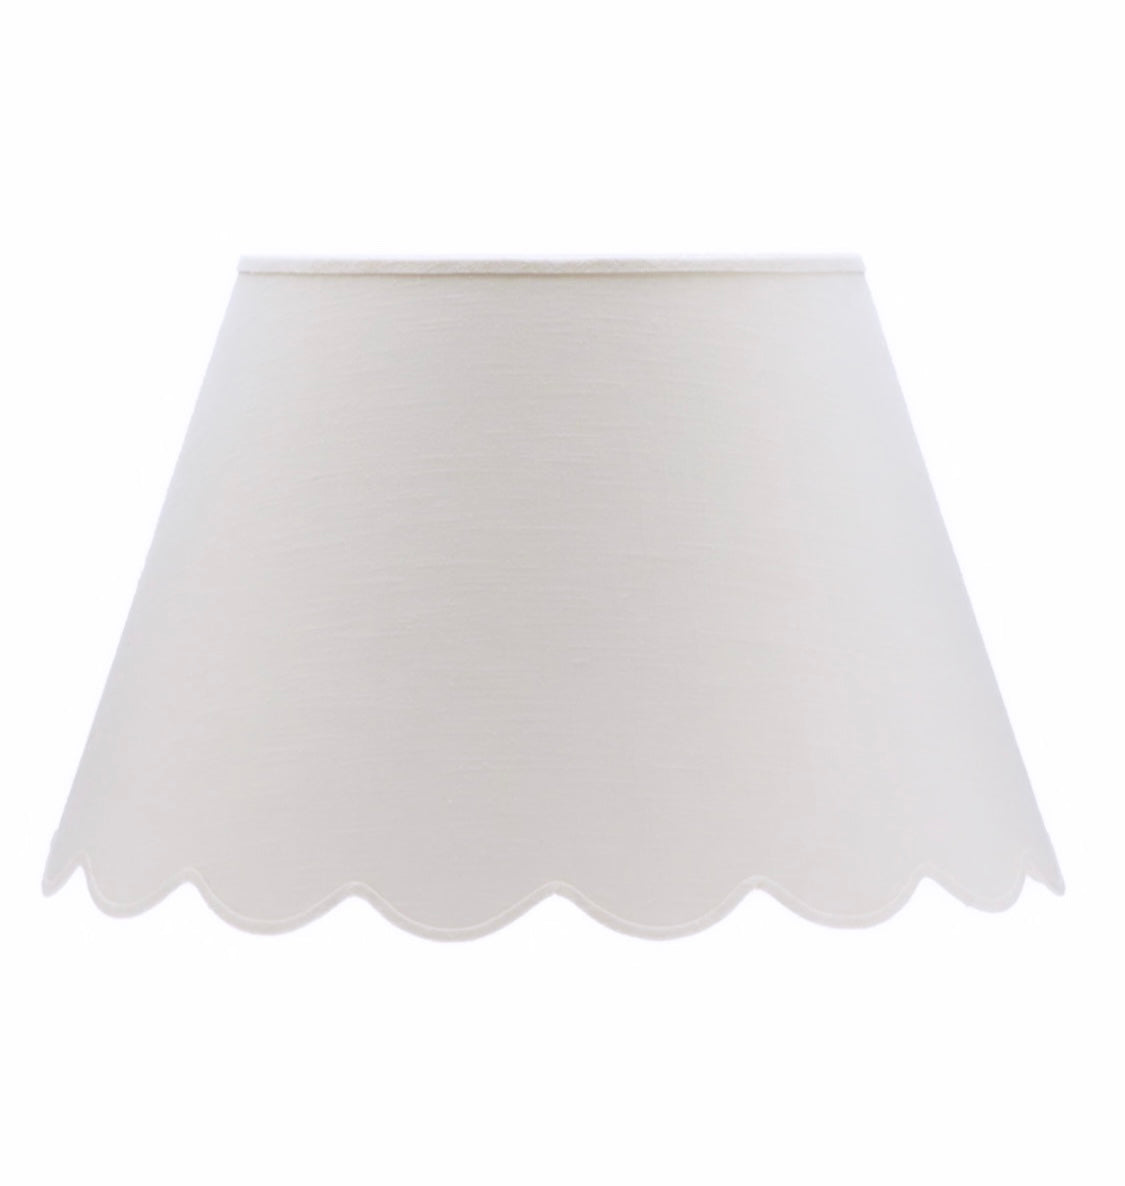 Large White Scallop Lampshade